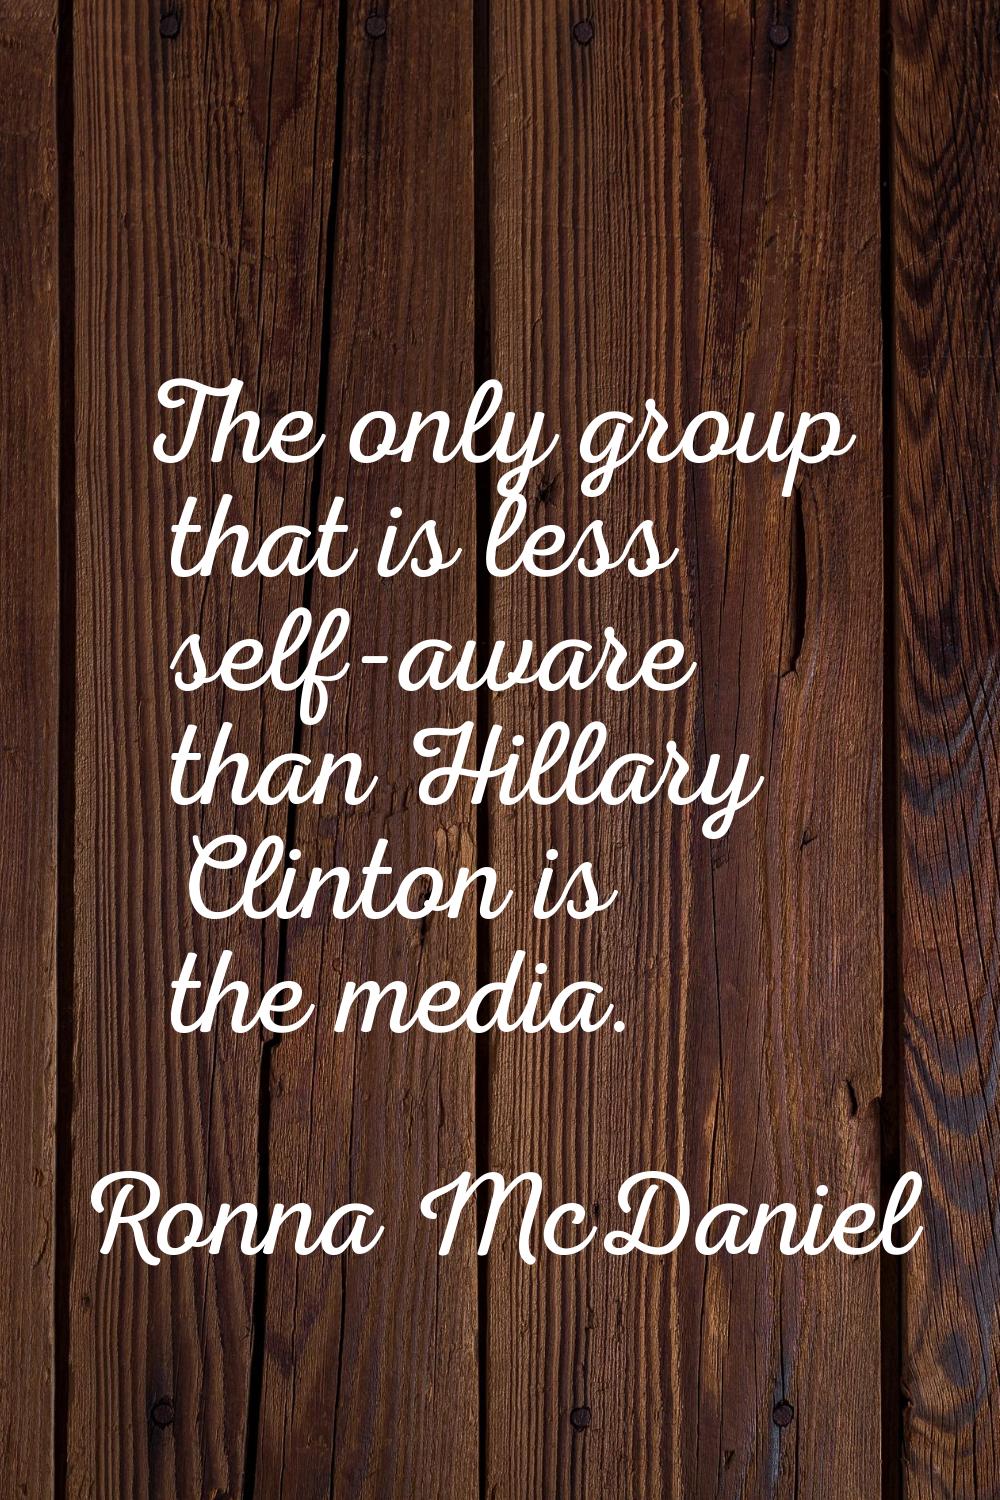 The only group that is less self-aware than Hillary Clinton is the media.